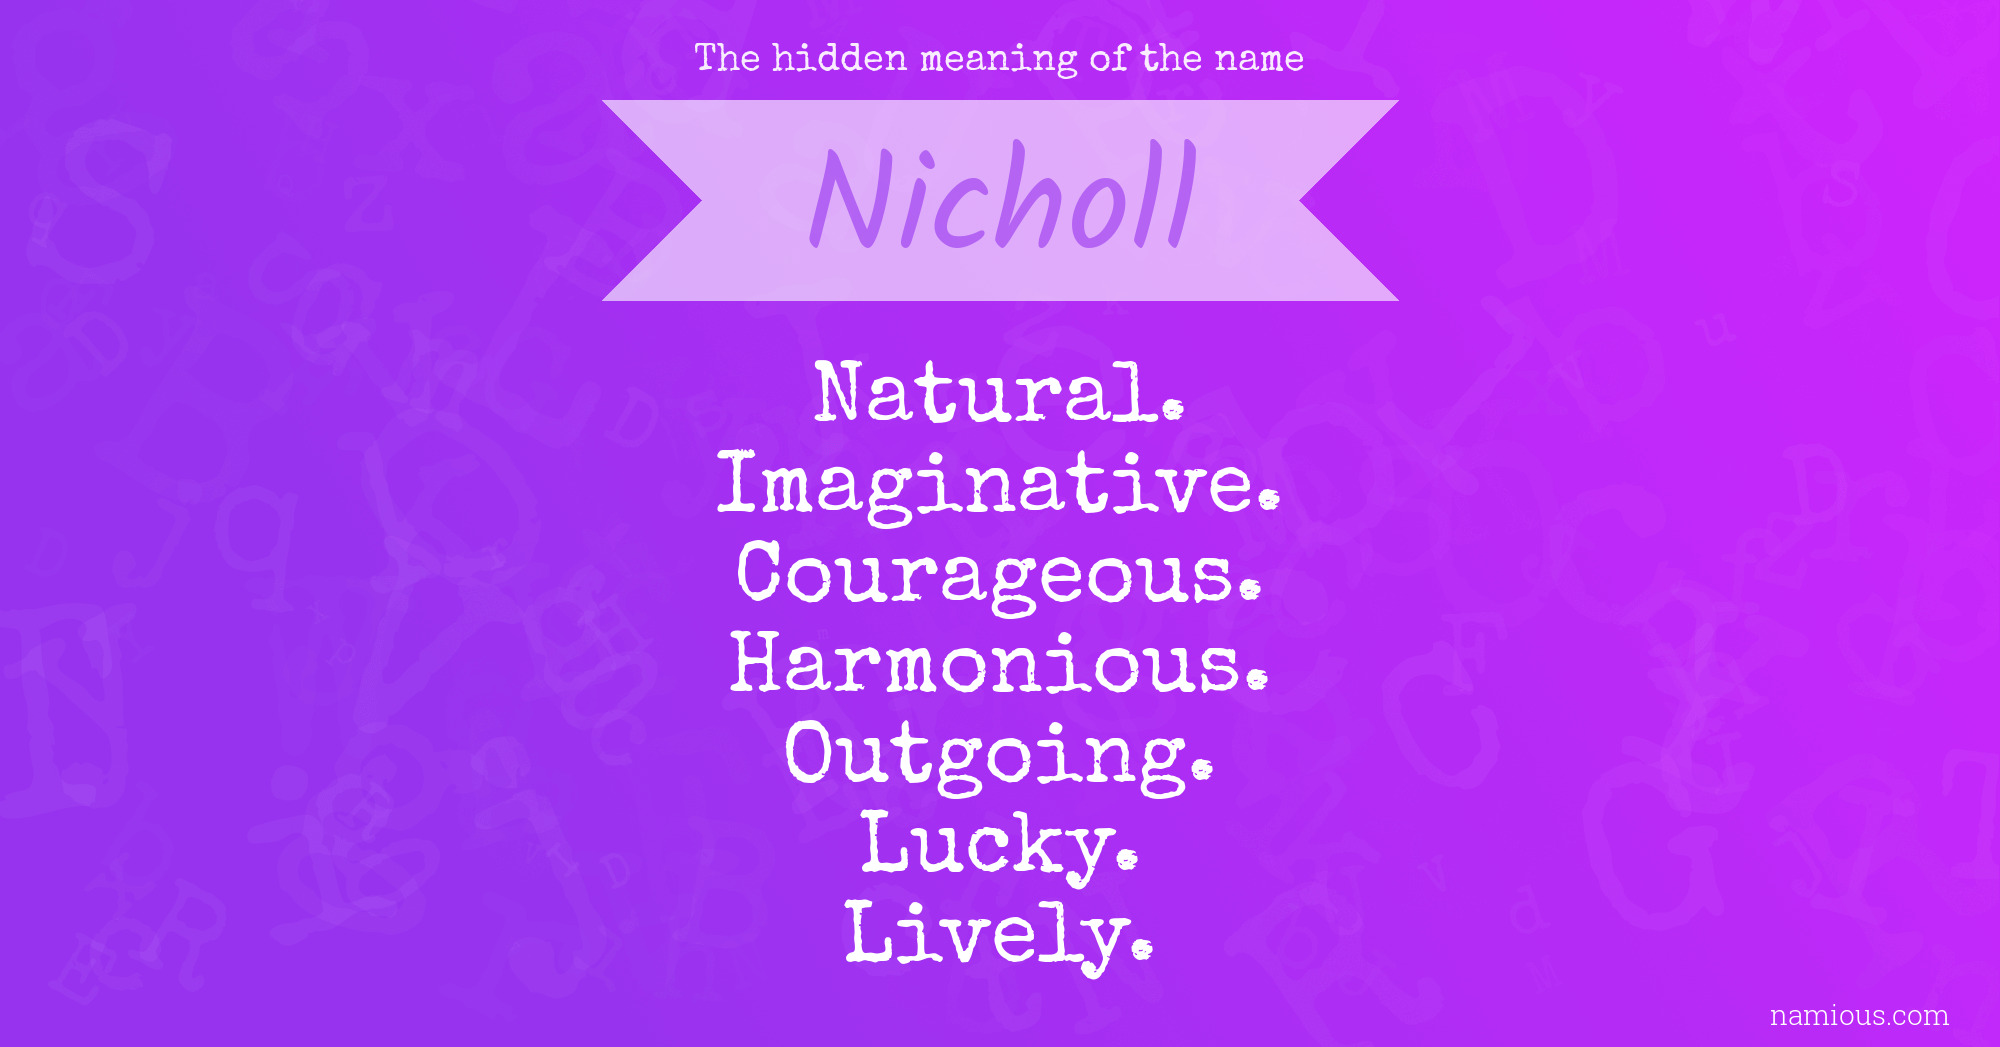 The hidden meaning of the name Nicholl